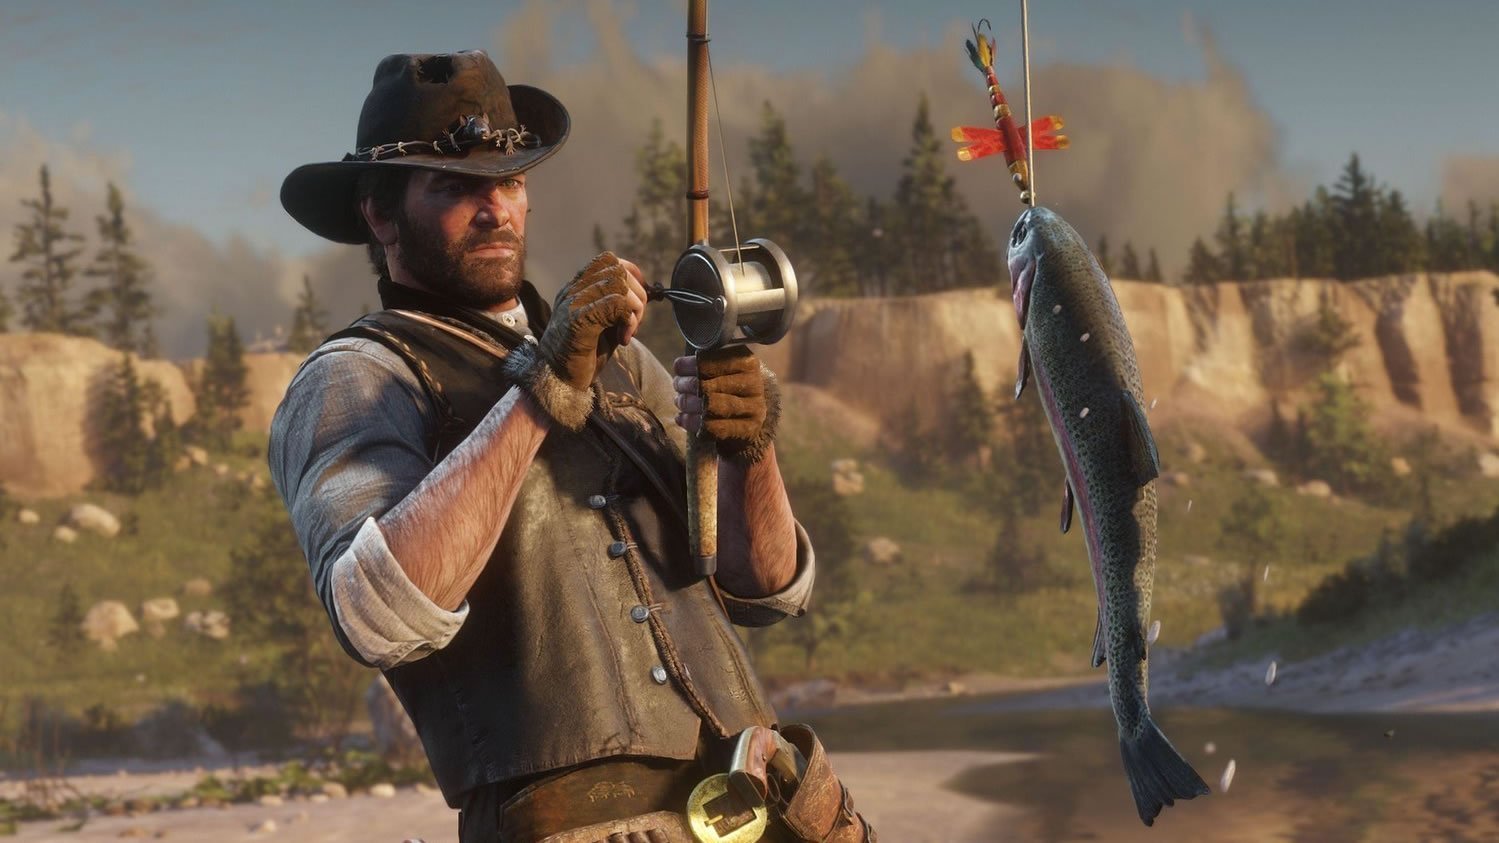 Red Dead Redemption 2: How to Unlock Fishing, Find Fish | Digital Trends